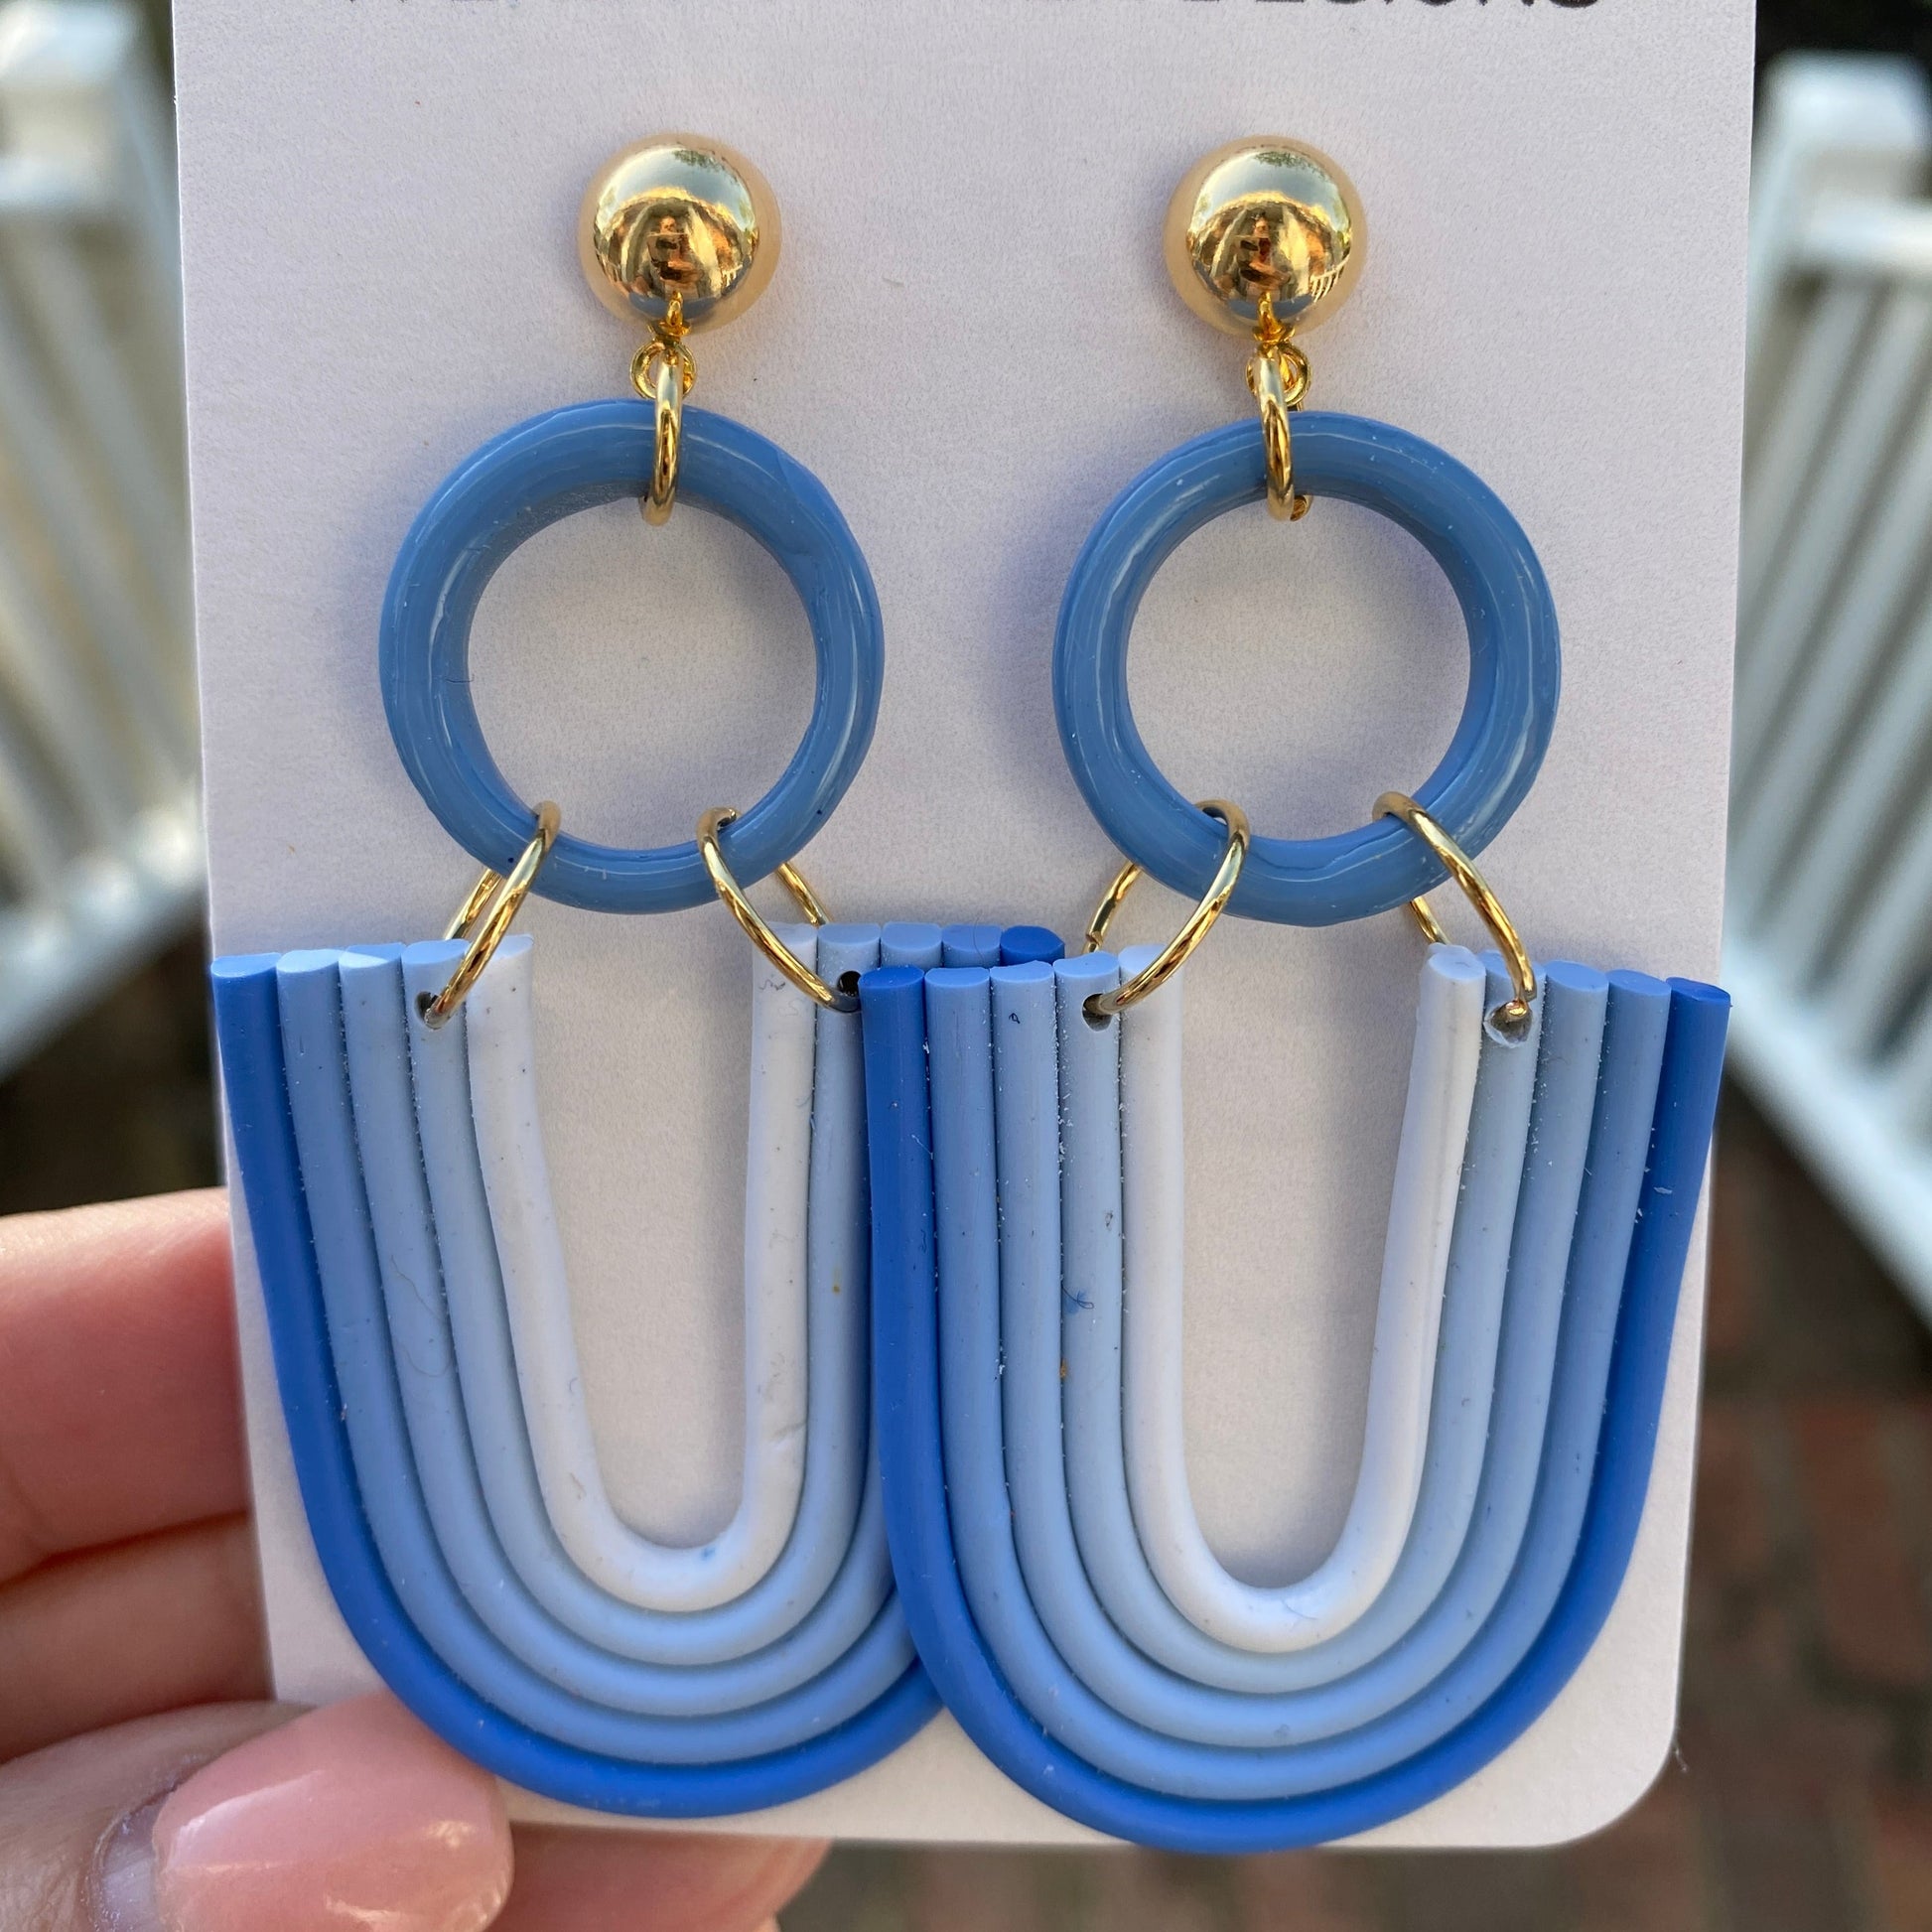 Spring Inspired Blue Ombre Rainbow Arch earrings made from polymer clay #0010 by Wendy Varner Designs 